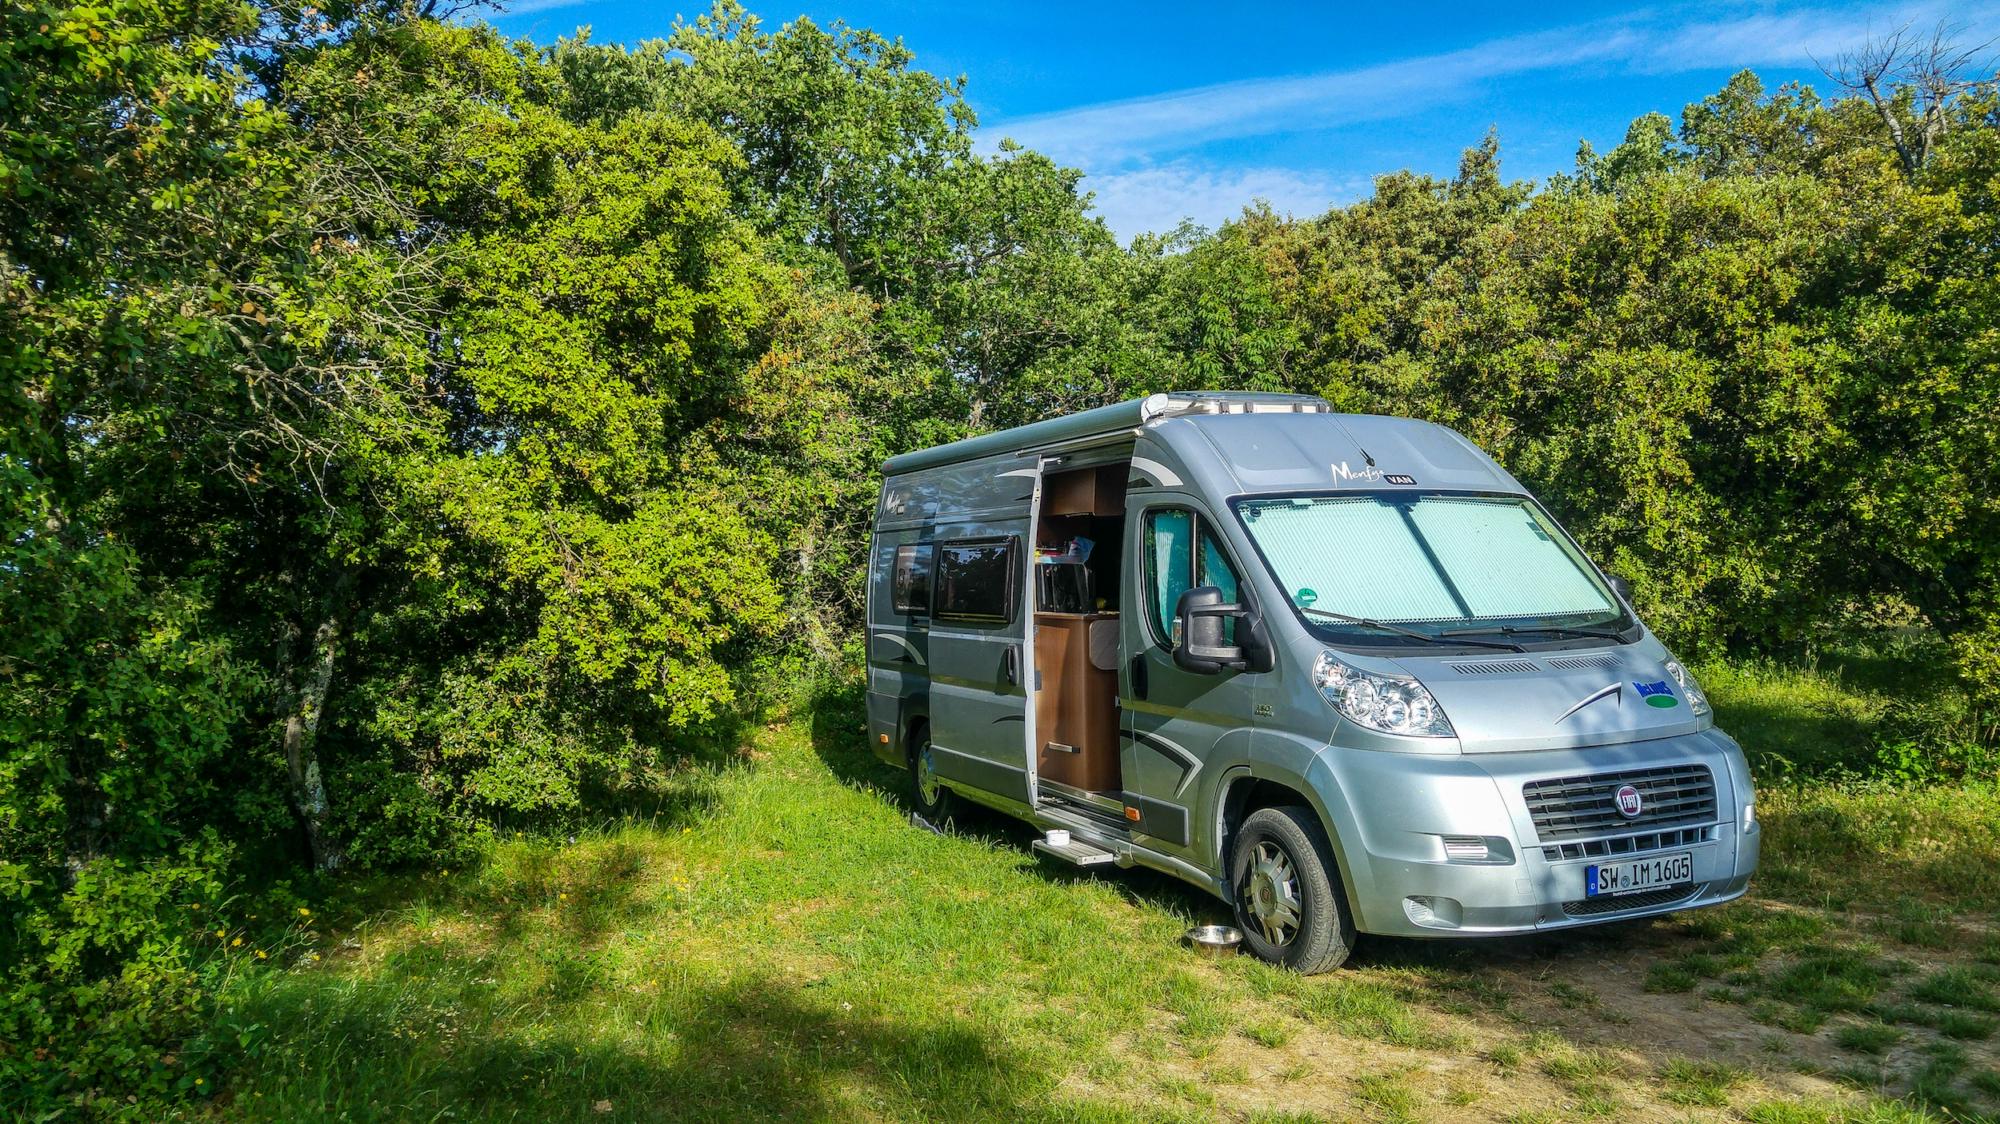 Campervan Hire Near Me – Find Motorhome Hire and Campervan Rental Nearby